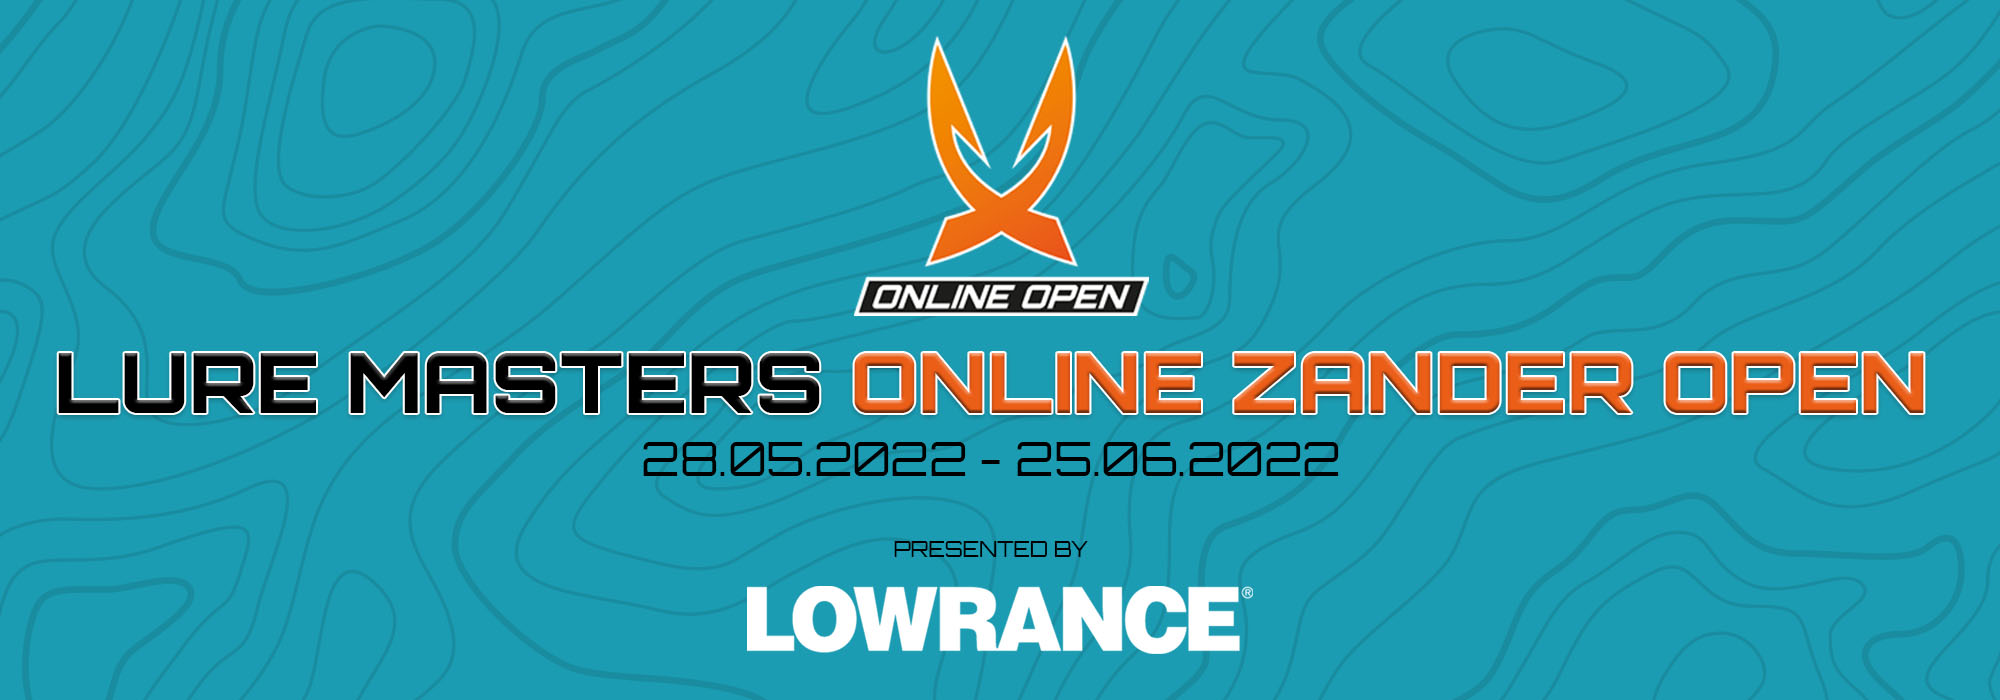 2022 Lure Masters Online Zander Open Stage ONE - presented by Lowrance